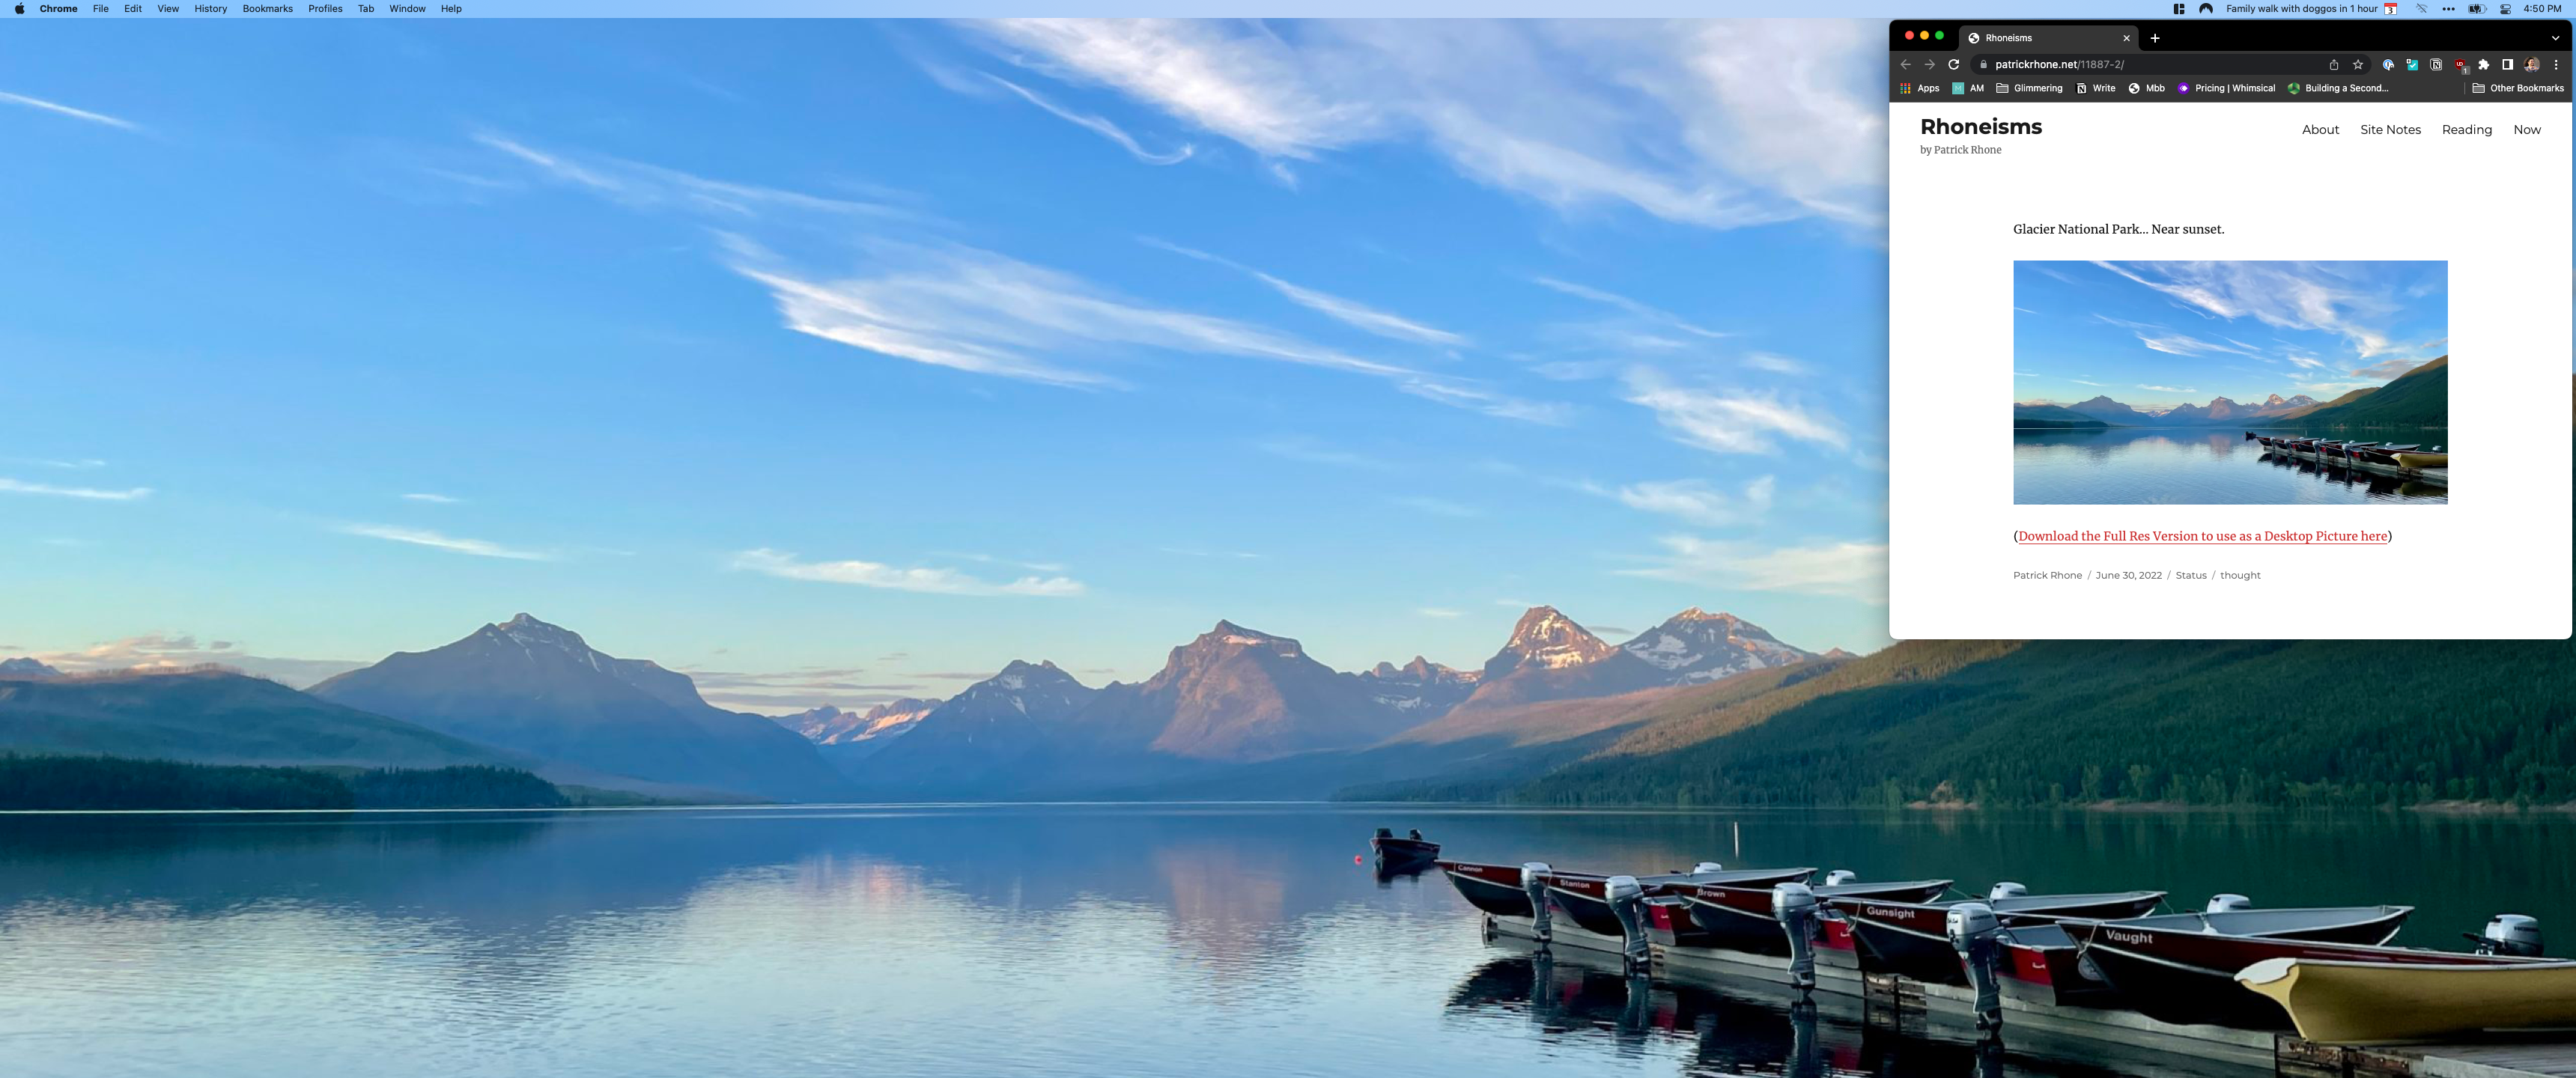 Galcier National Park Near sunset by Patrick Rhone. Wide angle photo  of a dock lined with colorful boats going out to the lake with green hills and snowcapped mountain range in the background.